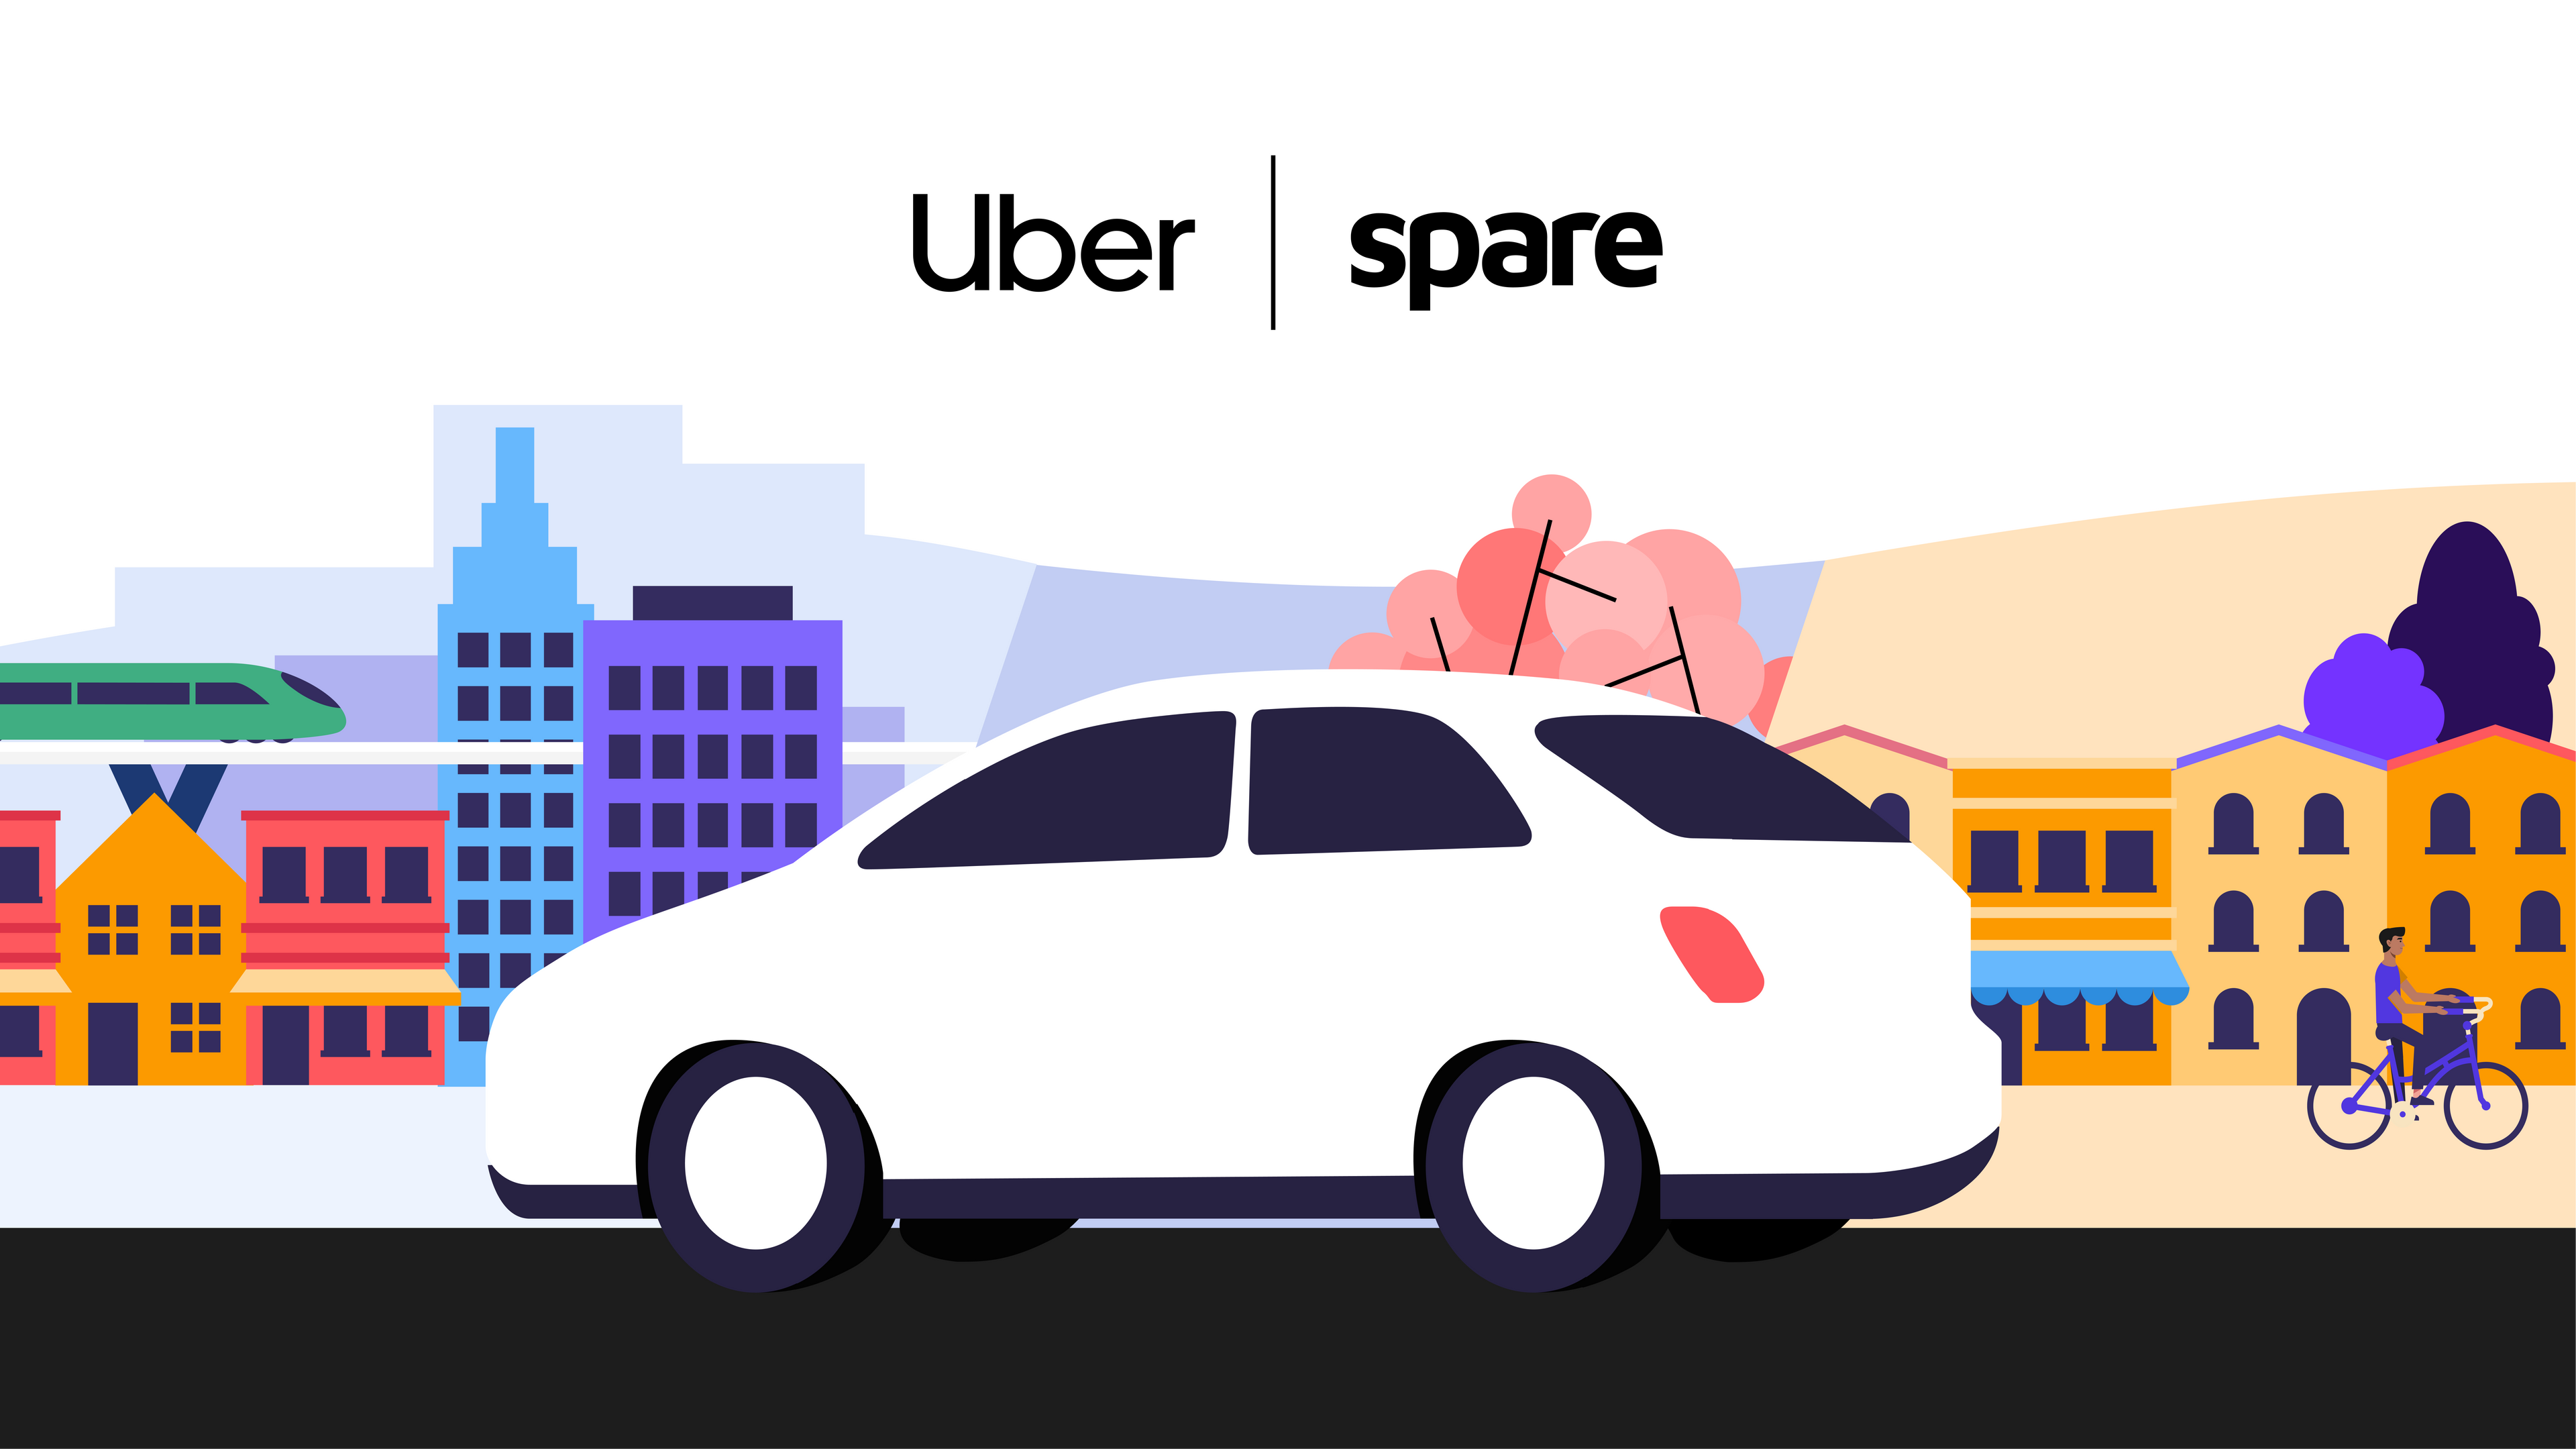 Uber and Spare logo illustration of an Uber vehicle in a town